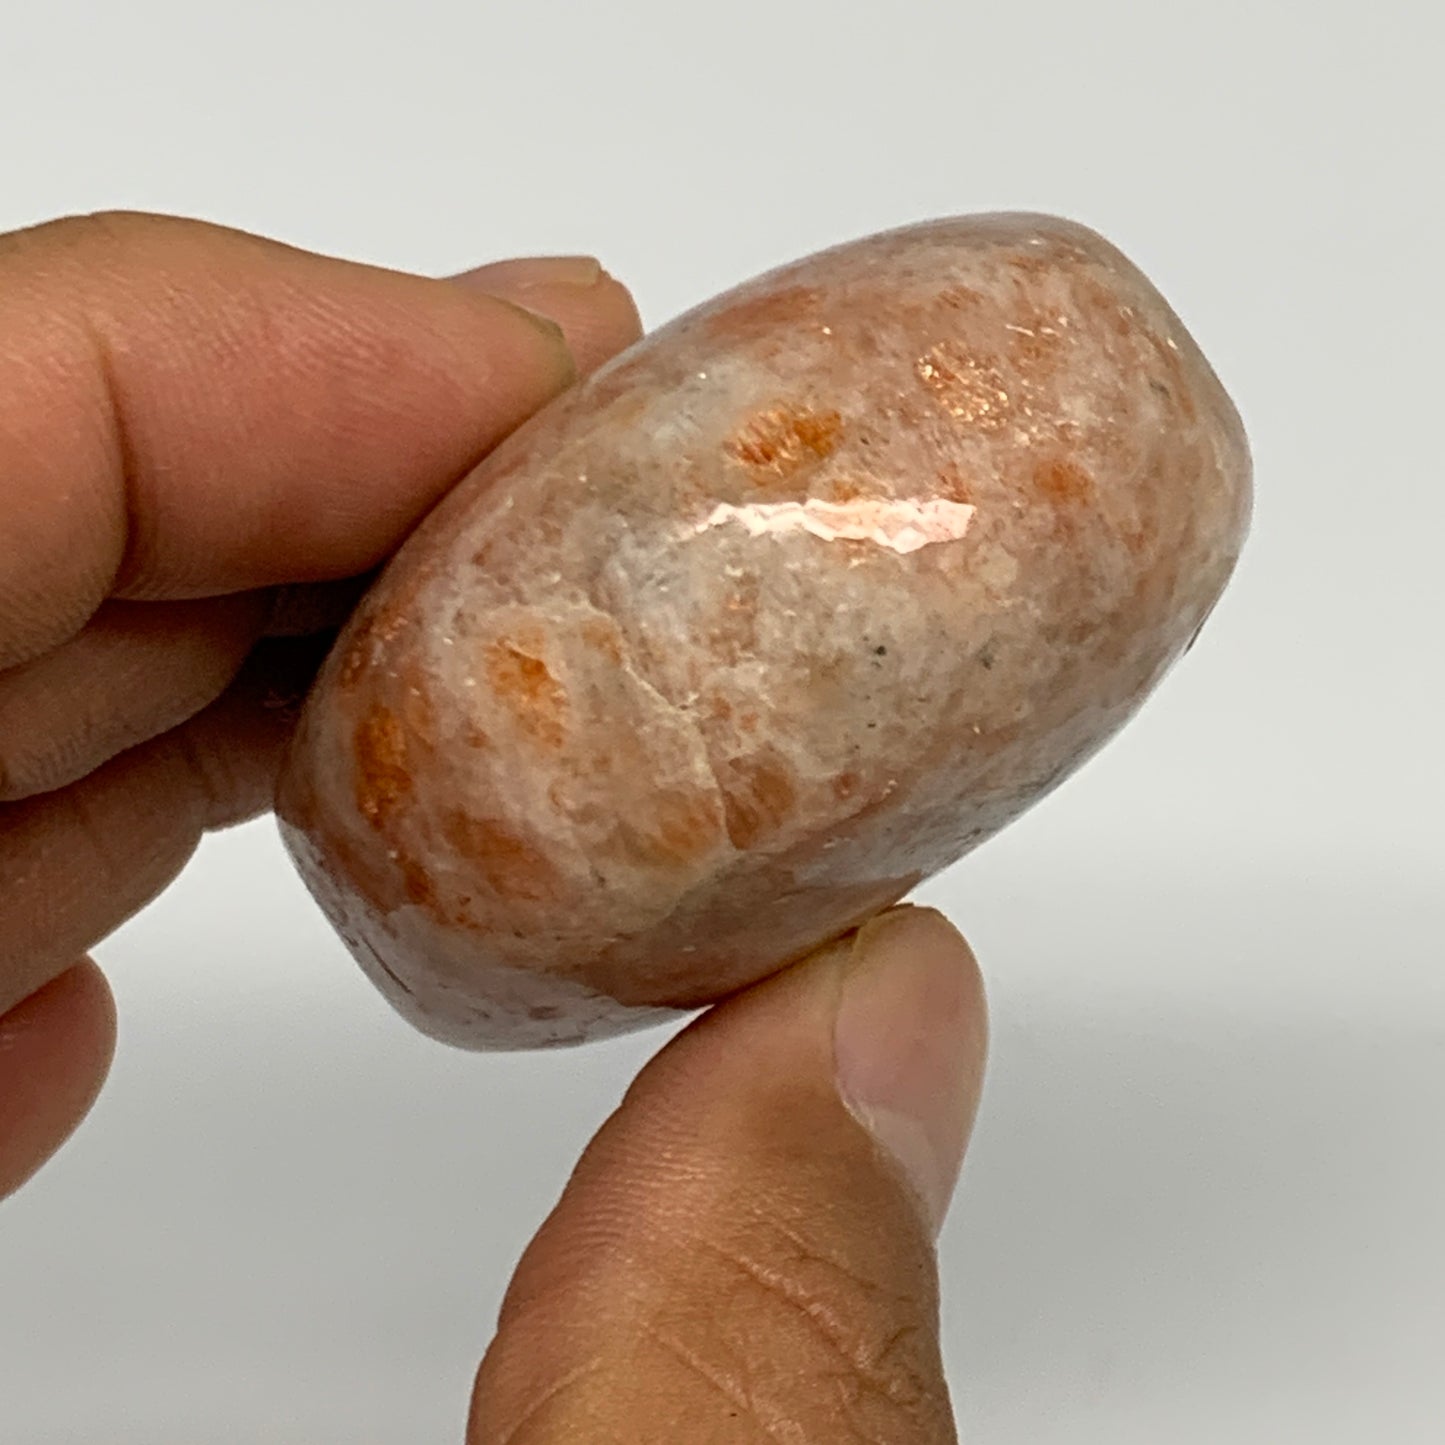 107.9g, 2.3"x1.7"x1", Natural Sunstone Palm-Stone Polished from India, B27064